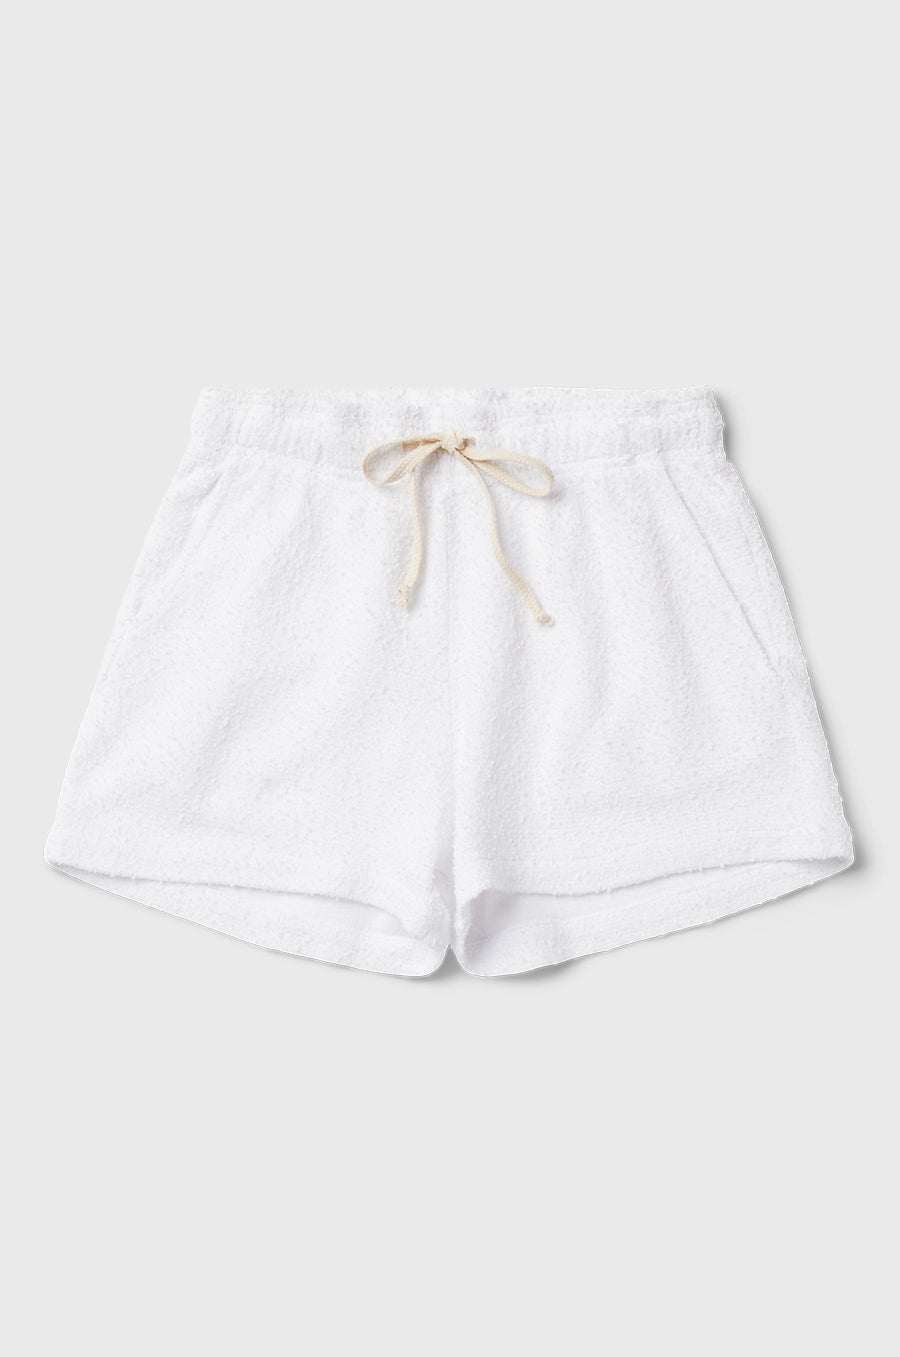 the lady & the sailor Weekend Short in White Boucle.